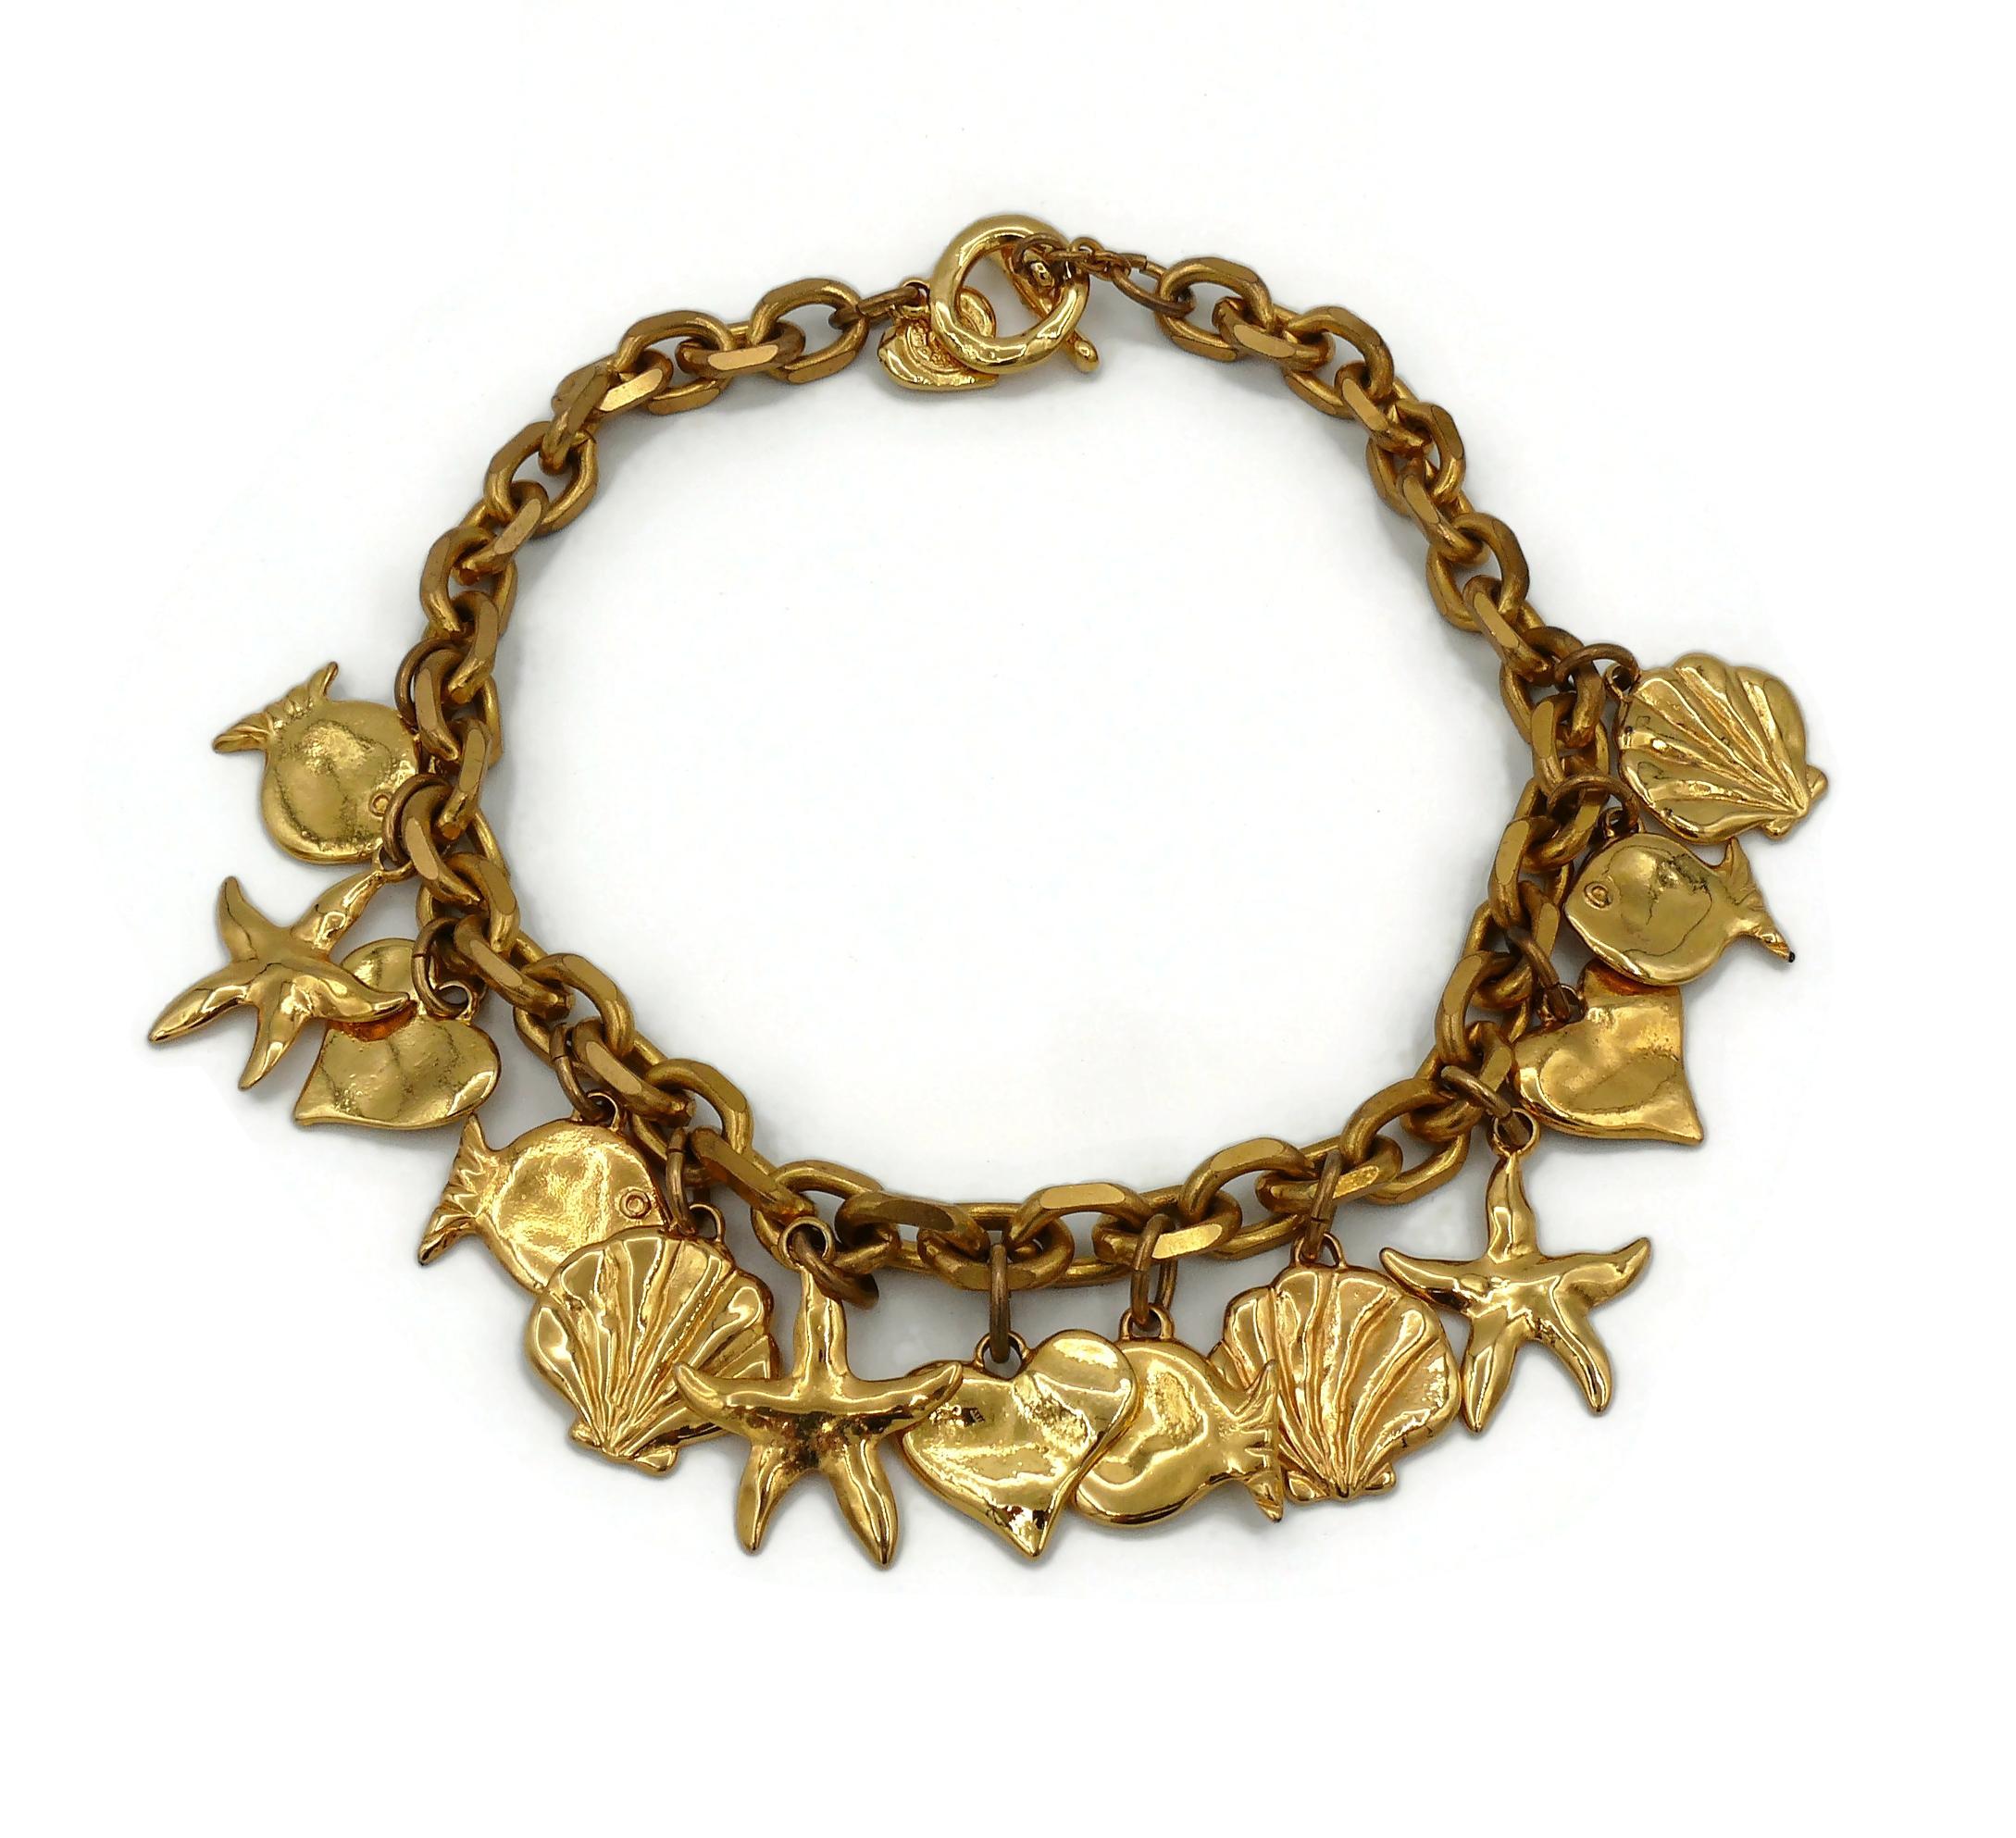 EDOUARD RAMBAUD vintage gold toned necklace featuring a chunky chain, sea life charms and hearts.

Embossed EDOUARD RAMBAUD Paris.

T-bar and toggle closure.

Indicative measurements :  length approx. 45 cm (17.72 inches) / chain width approx. 1.2